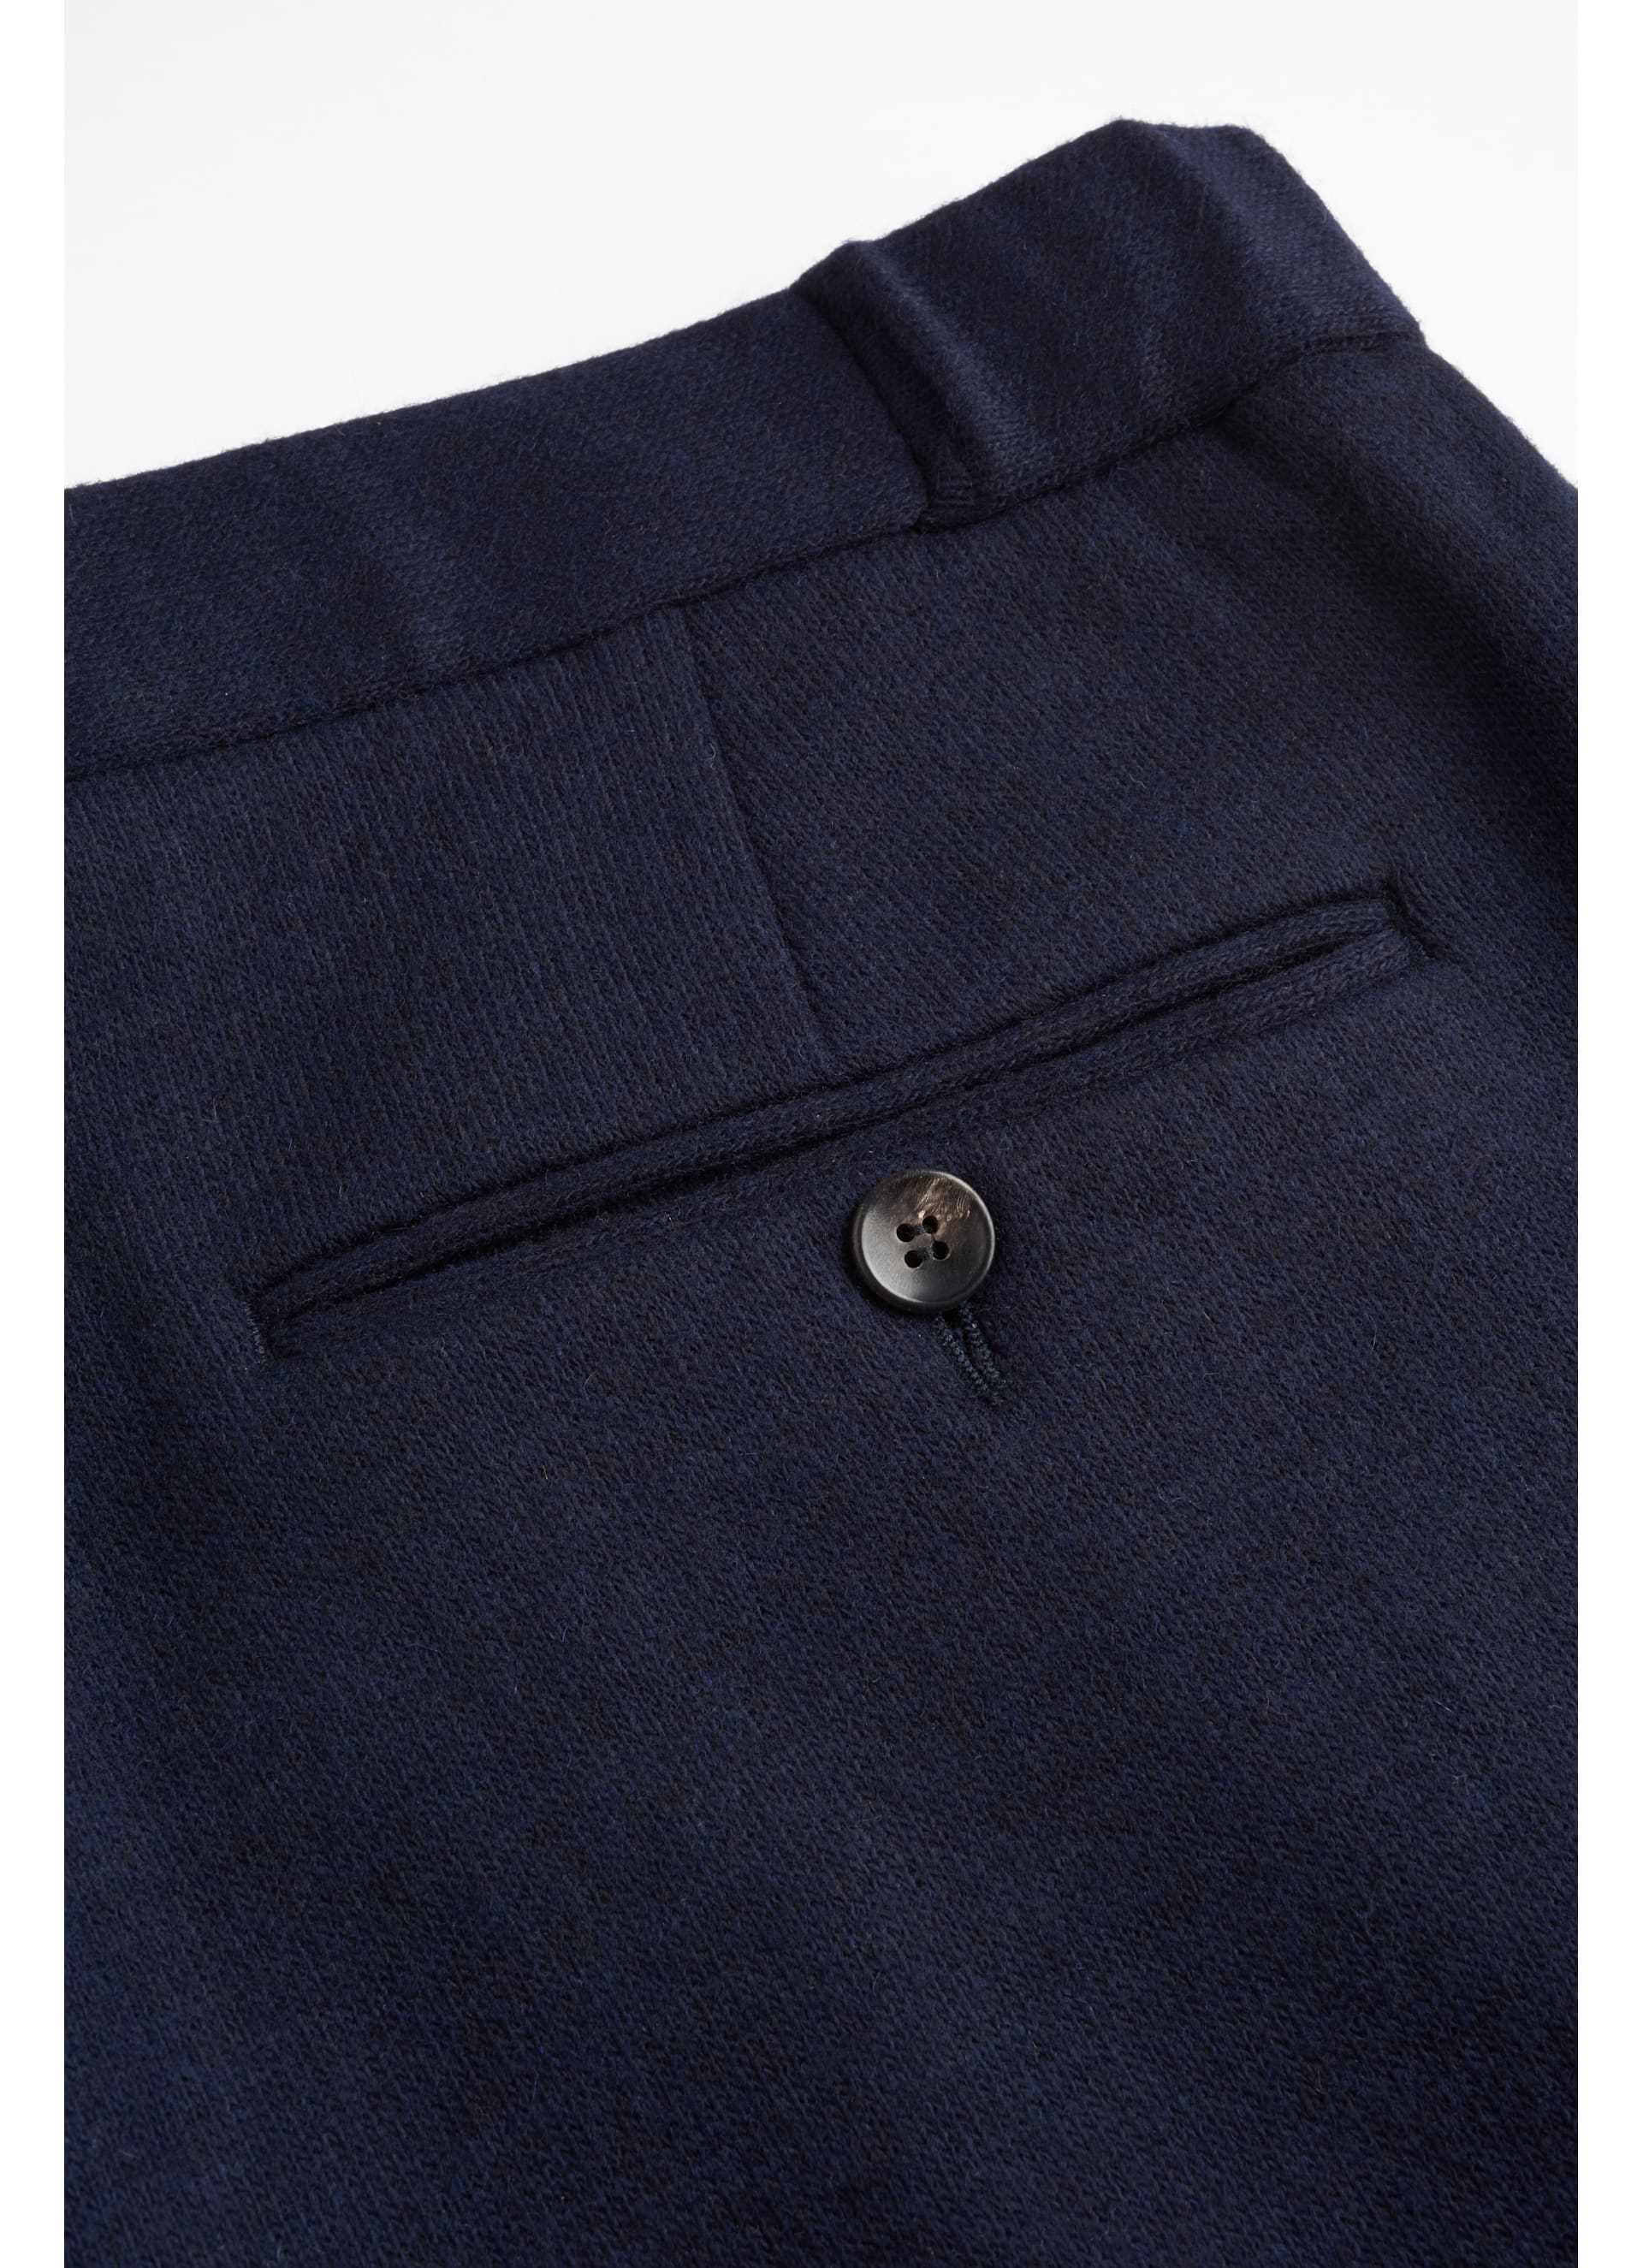 Navy Ames Pleat Trousers B5532i | Suitsupply Online Store